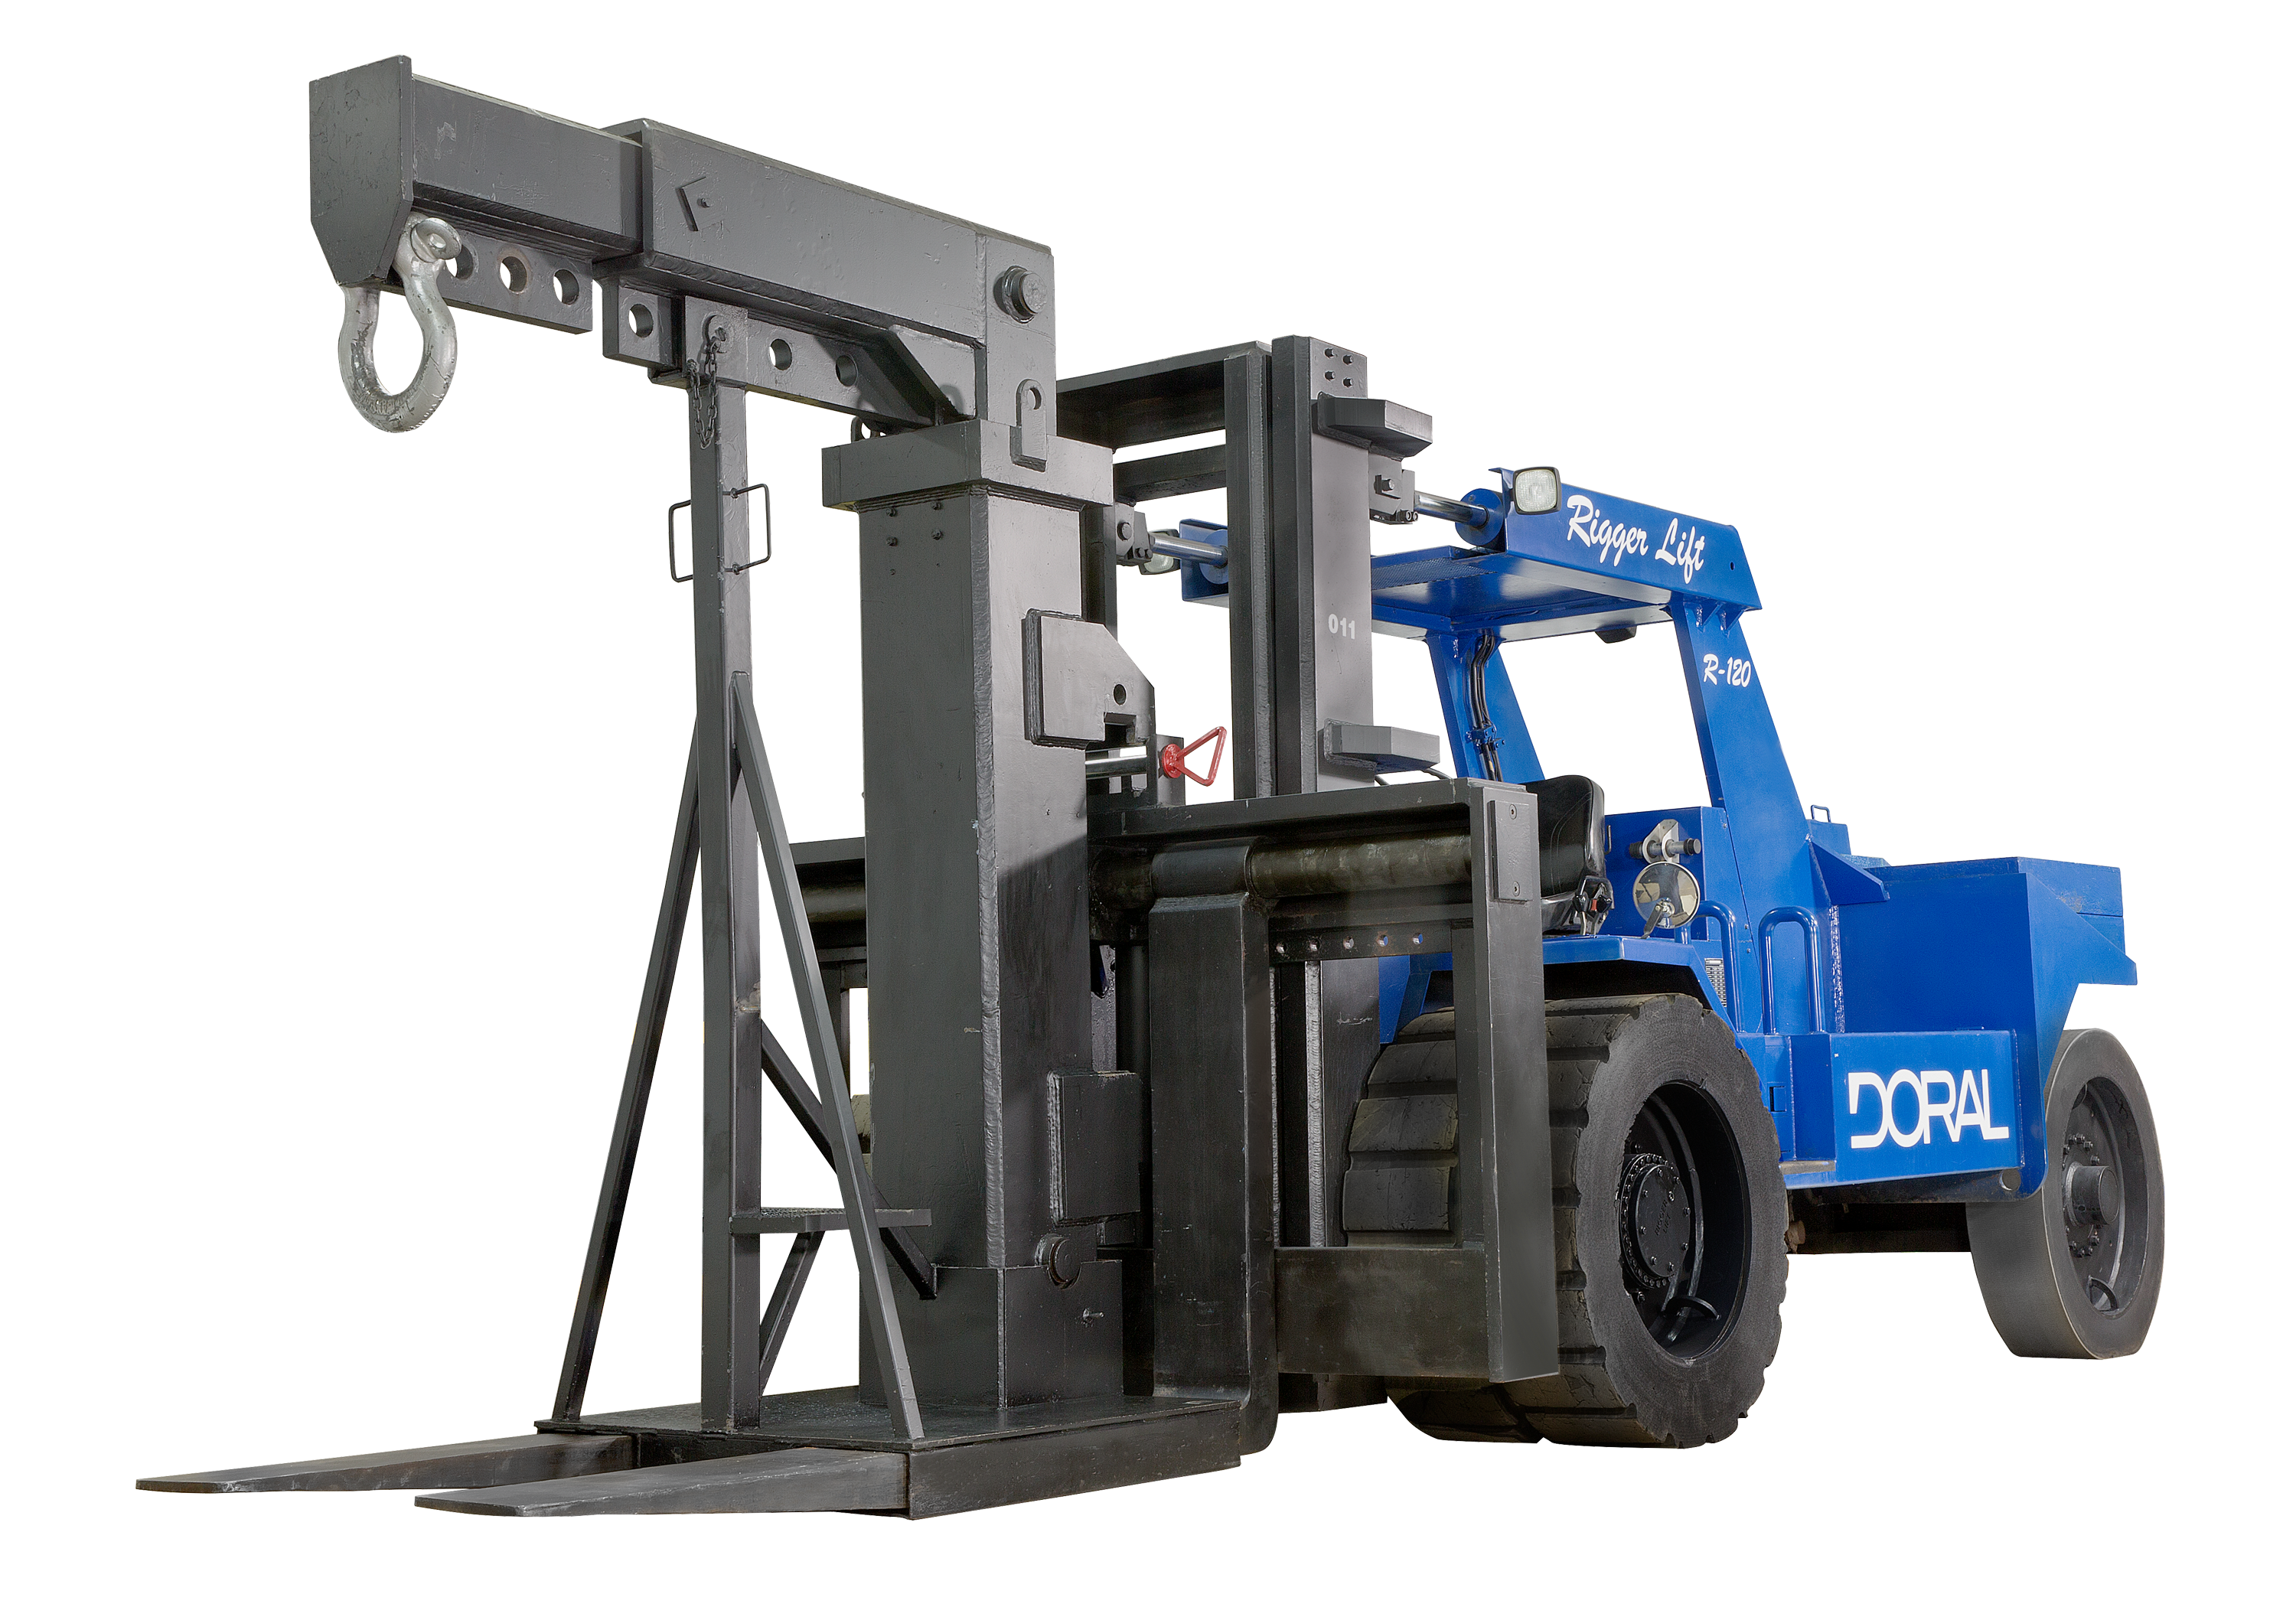 Rent Or Buy Used Rigging Forklift And Gantry Equipment Nationwide Doral Equipment Rental Has The Equipment You Need To Get The Job Done